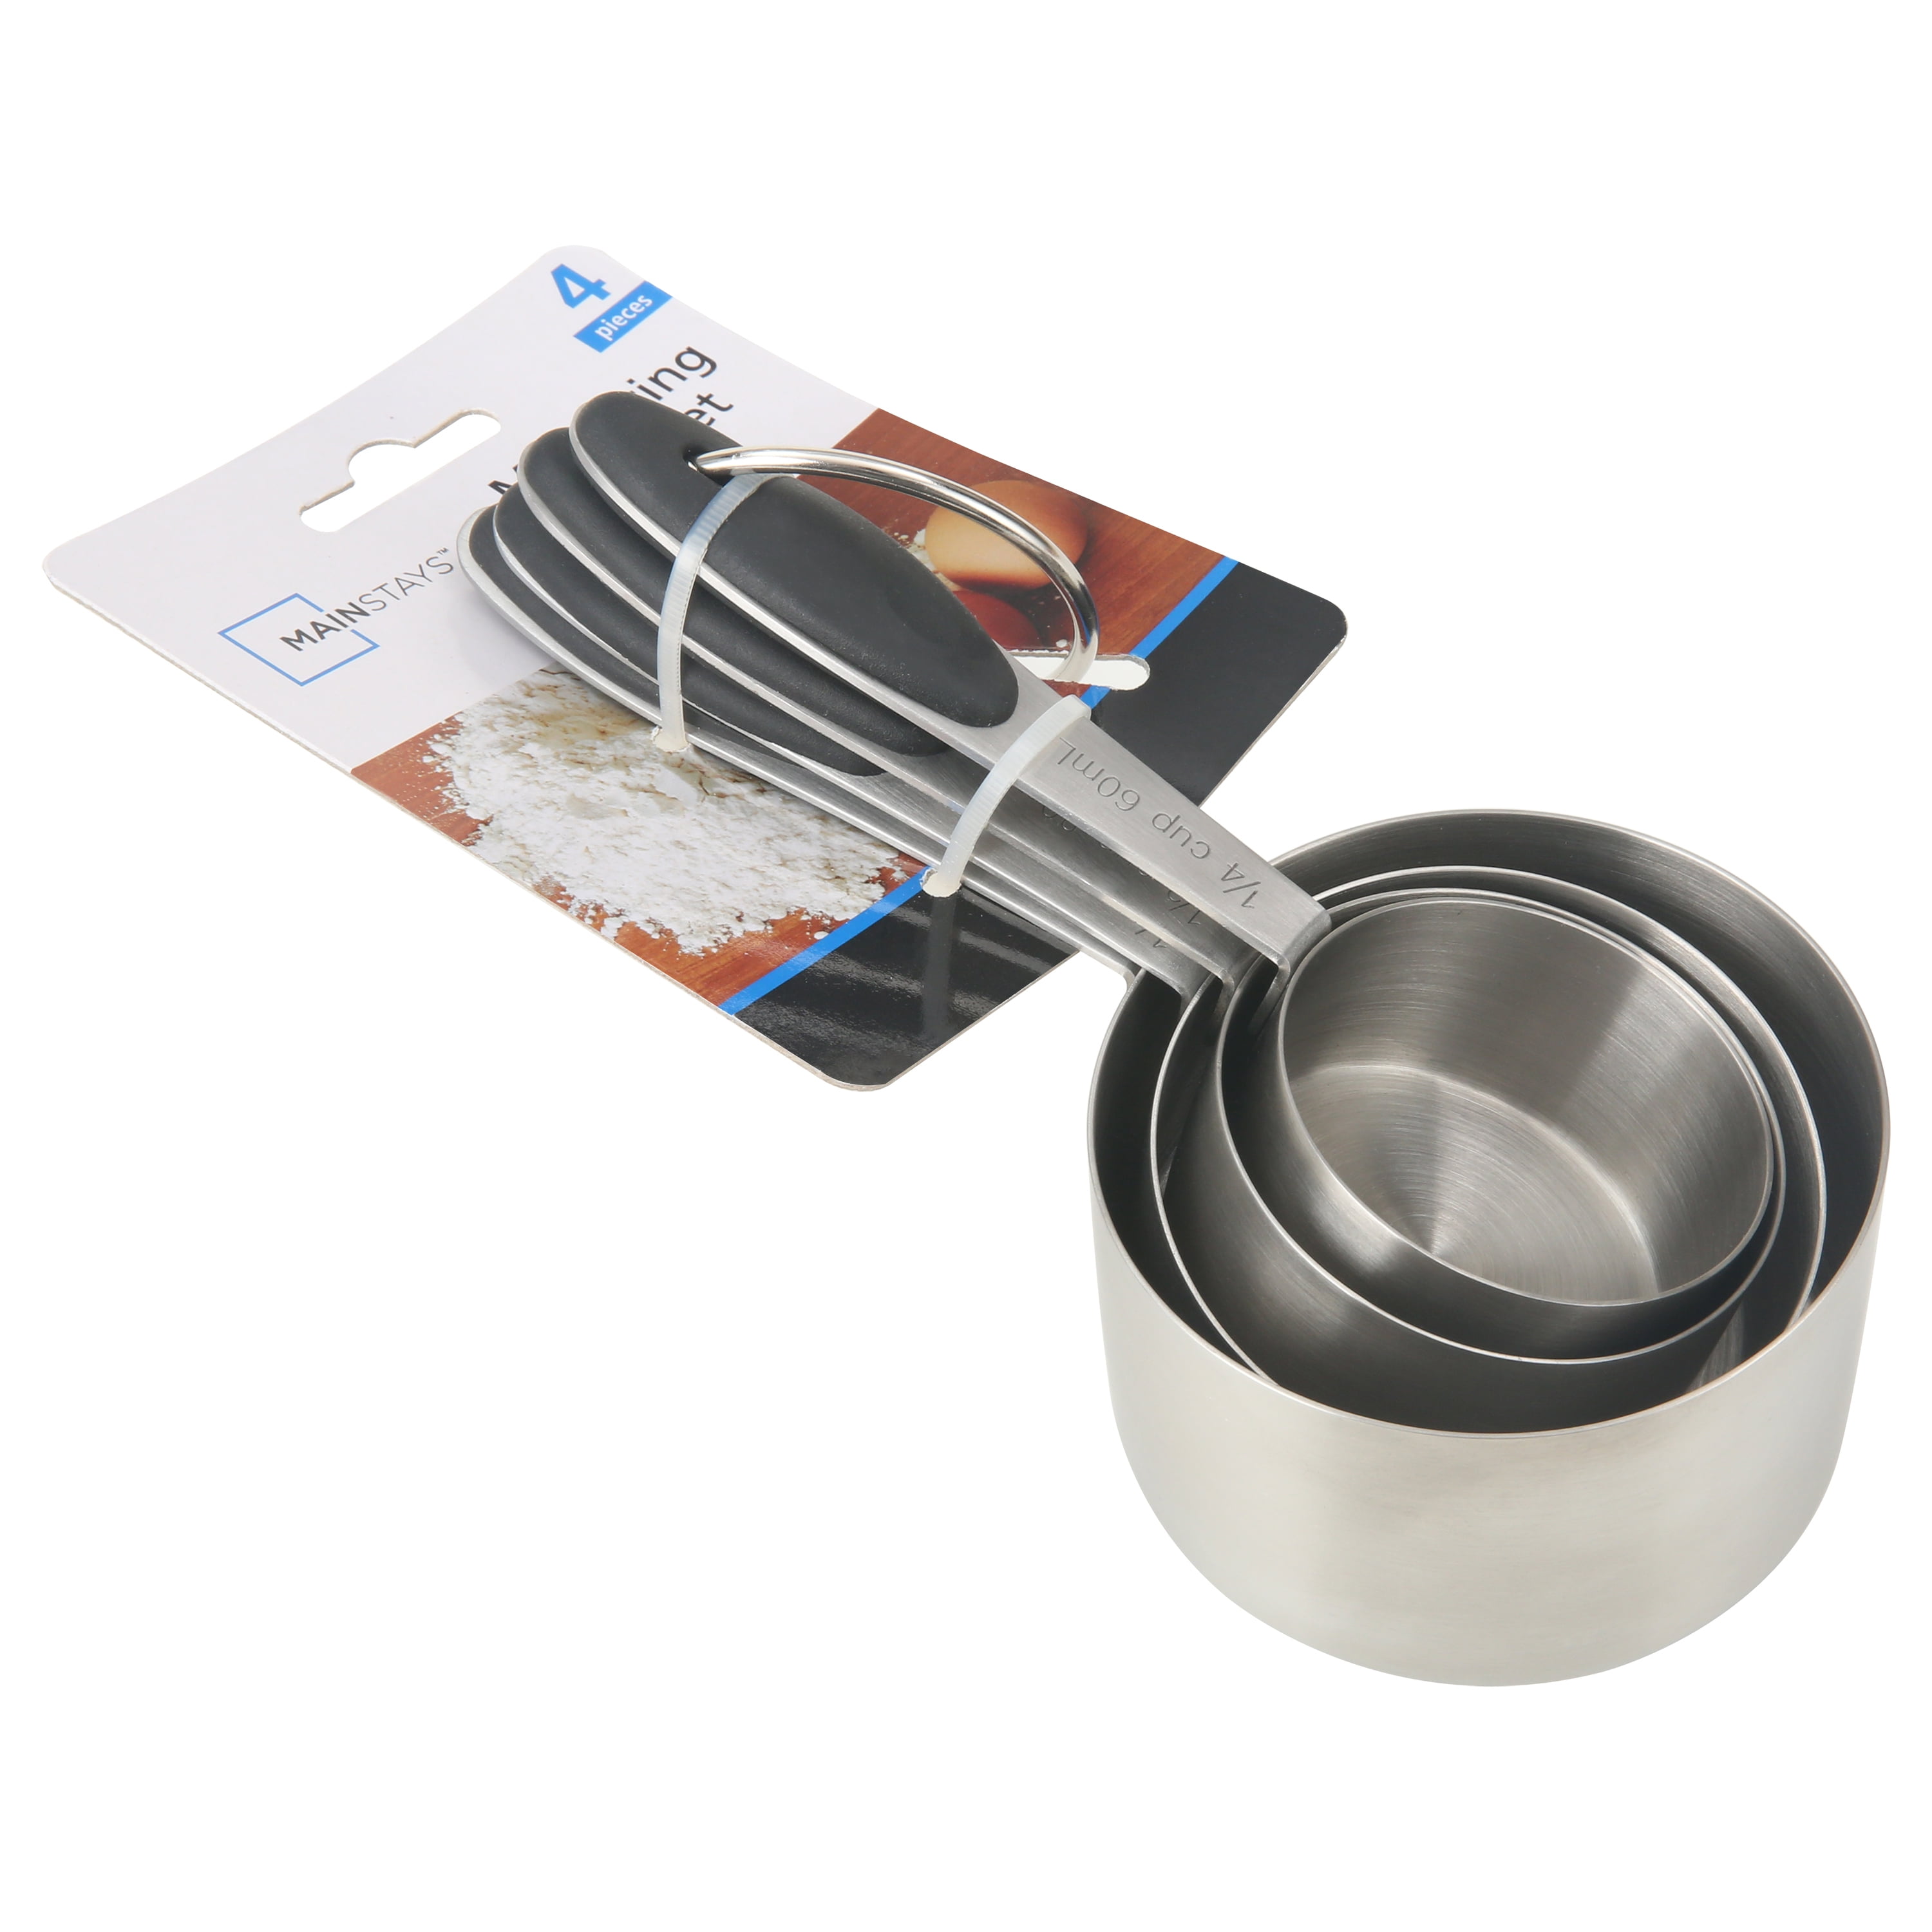 Stainless Steel Wash Cup With Mosaic Handles - 4 D X 5 H, 4D x 5H - Kroger